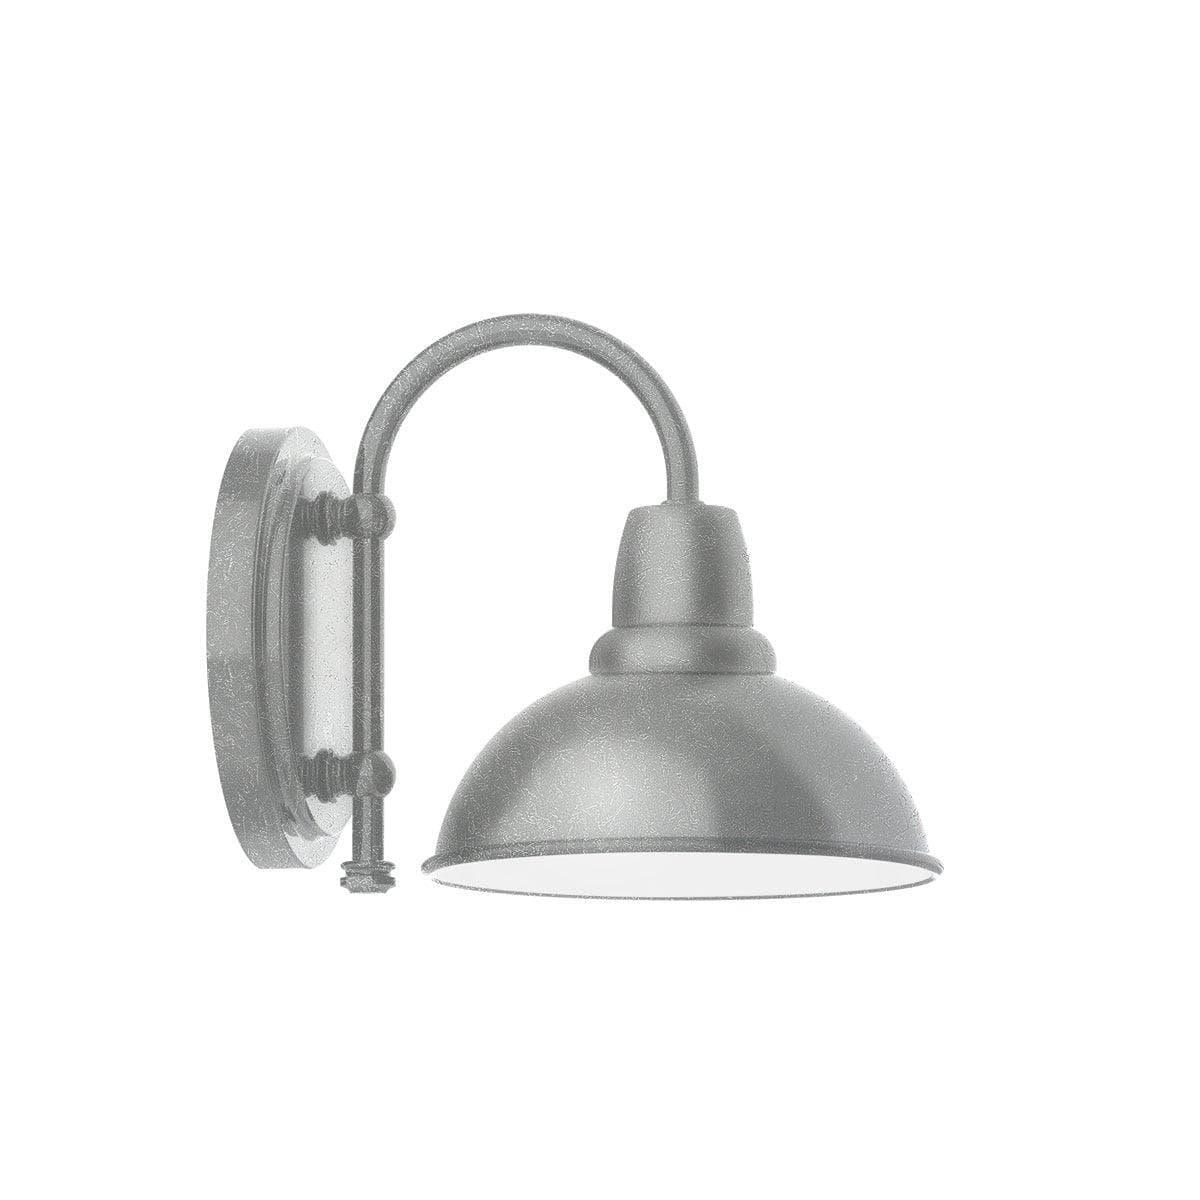 Montclair Light Works - Cafe 8" Wall Sconce - SCB105-49 | Montreal Lighting & Hardware